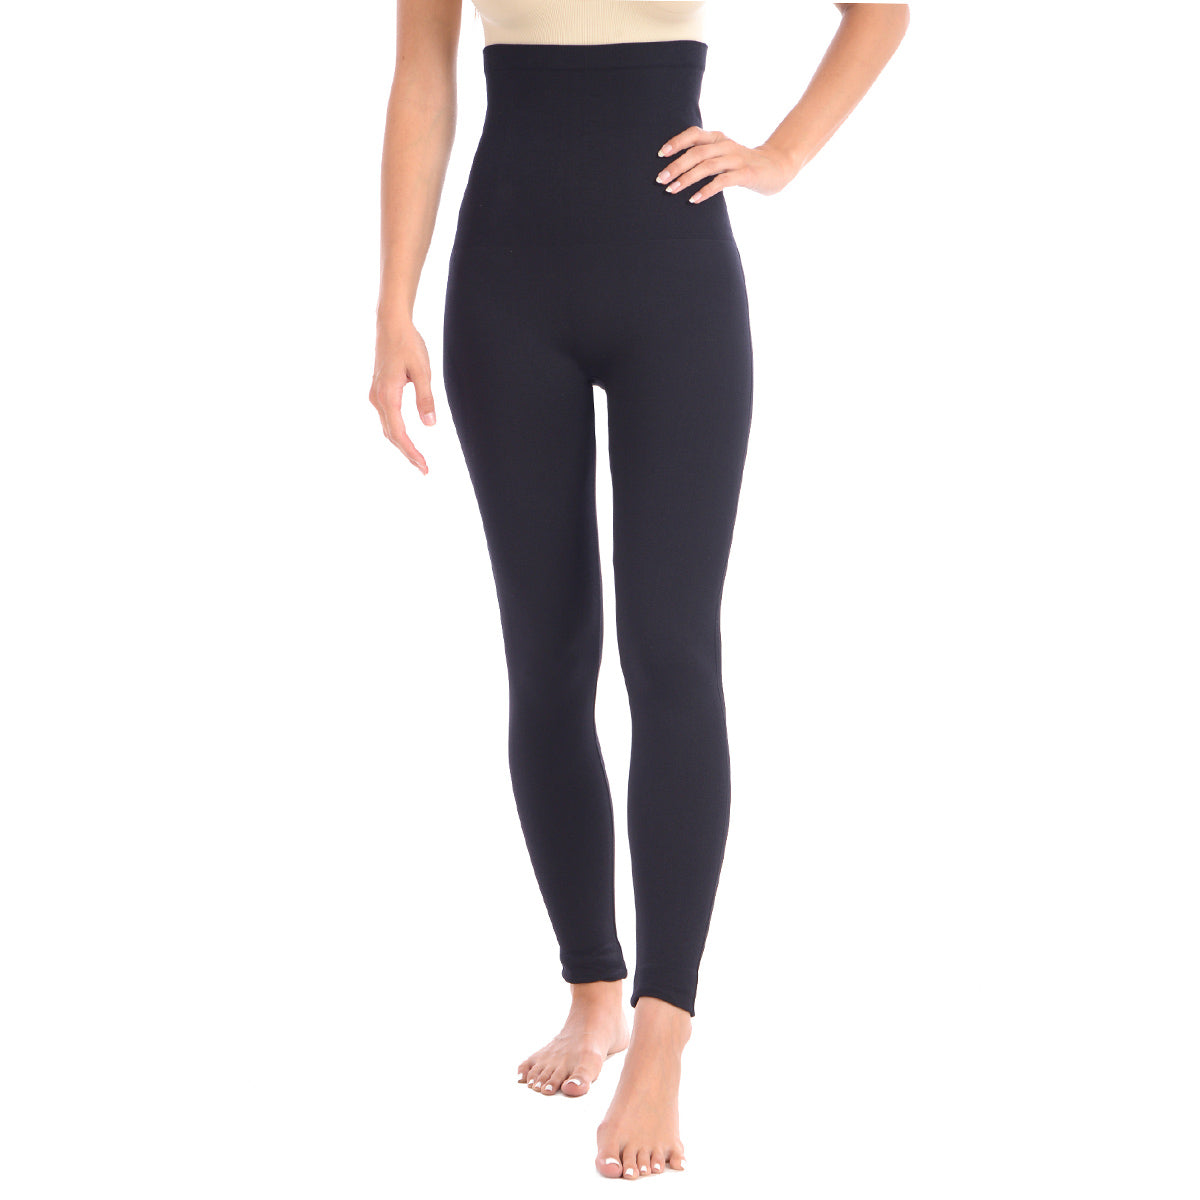 Full Shaping Legging With Double Layer 5" Waistband